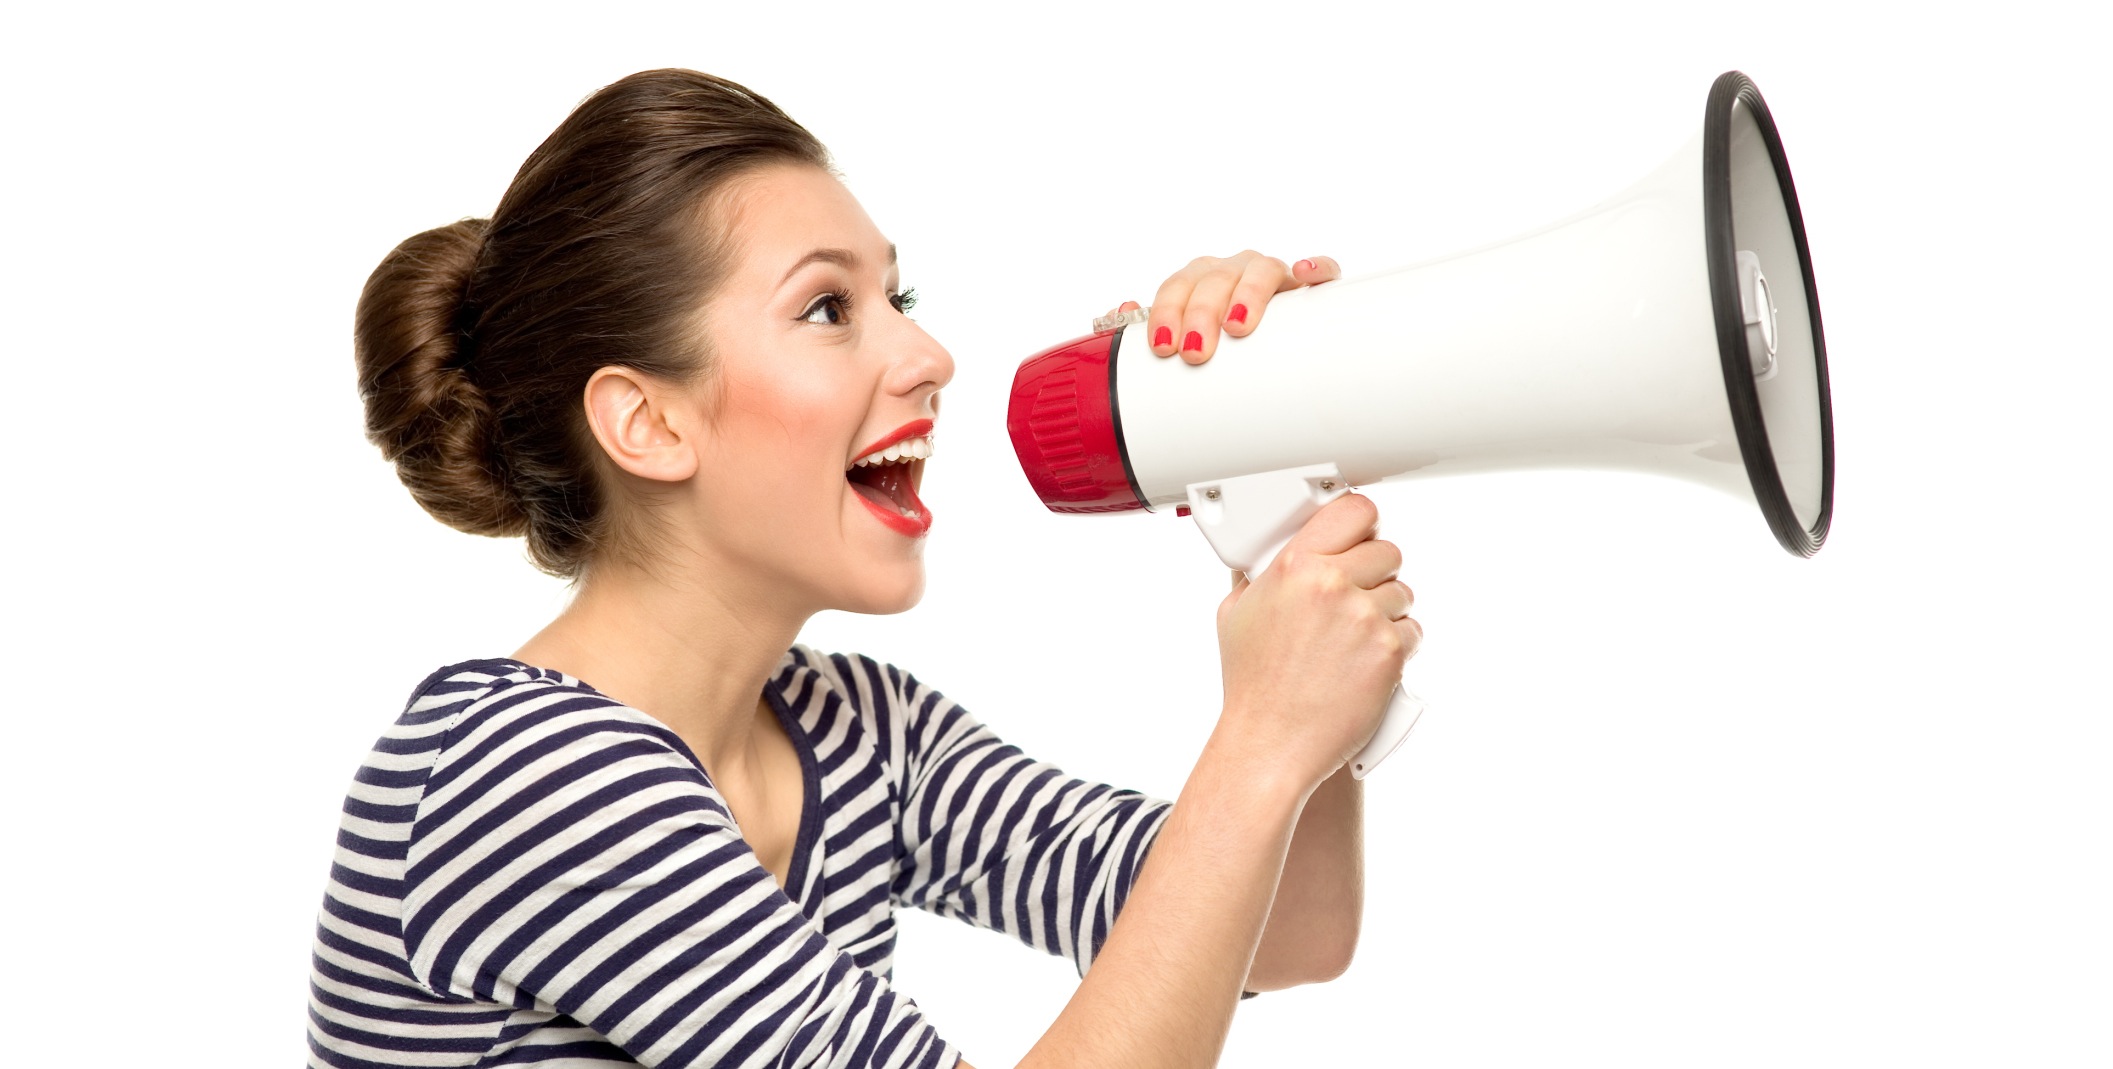 Attractive woman with megaphone